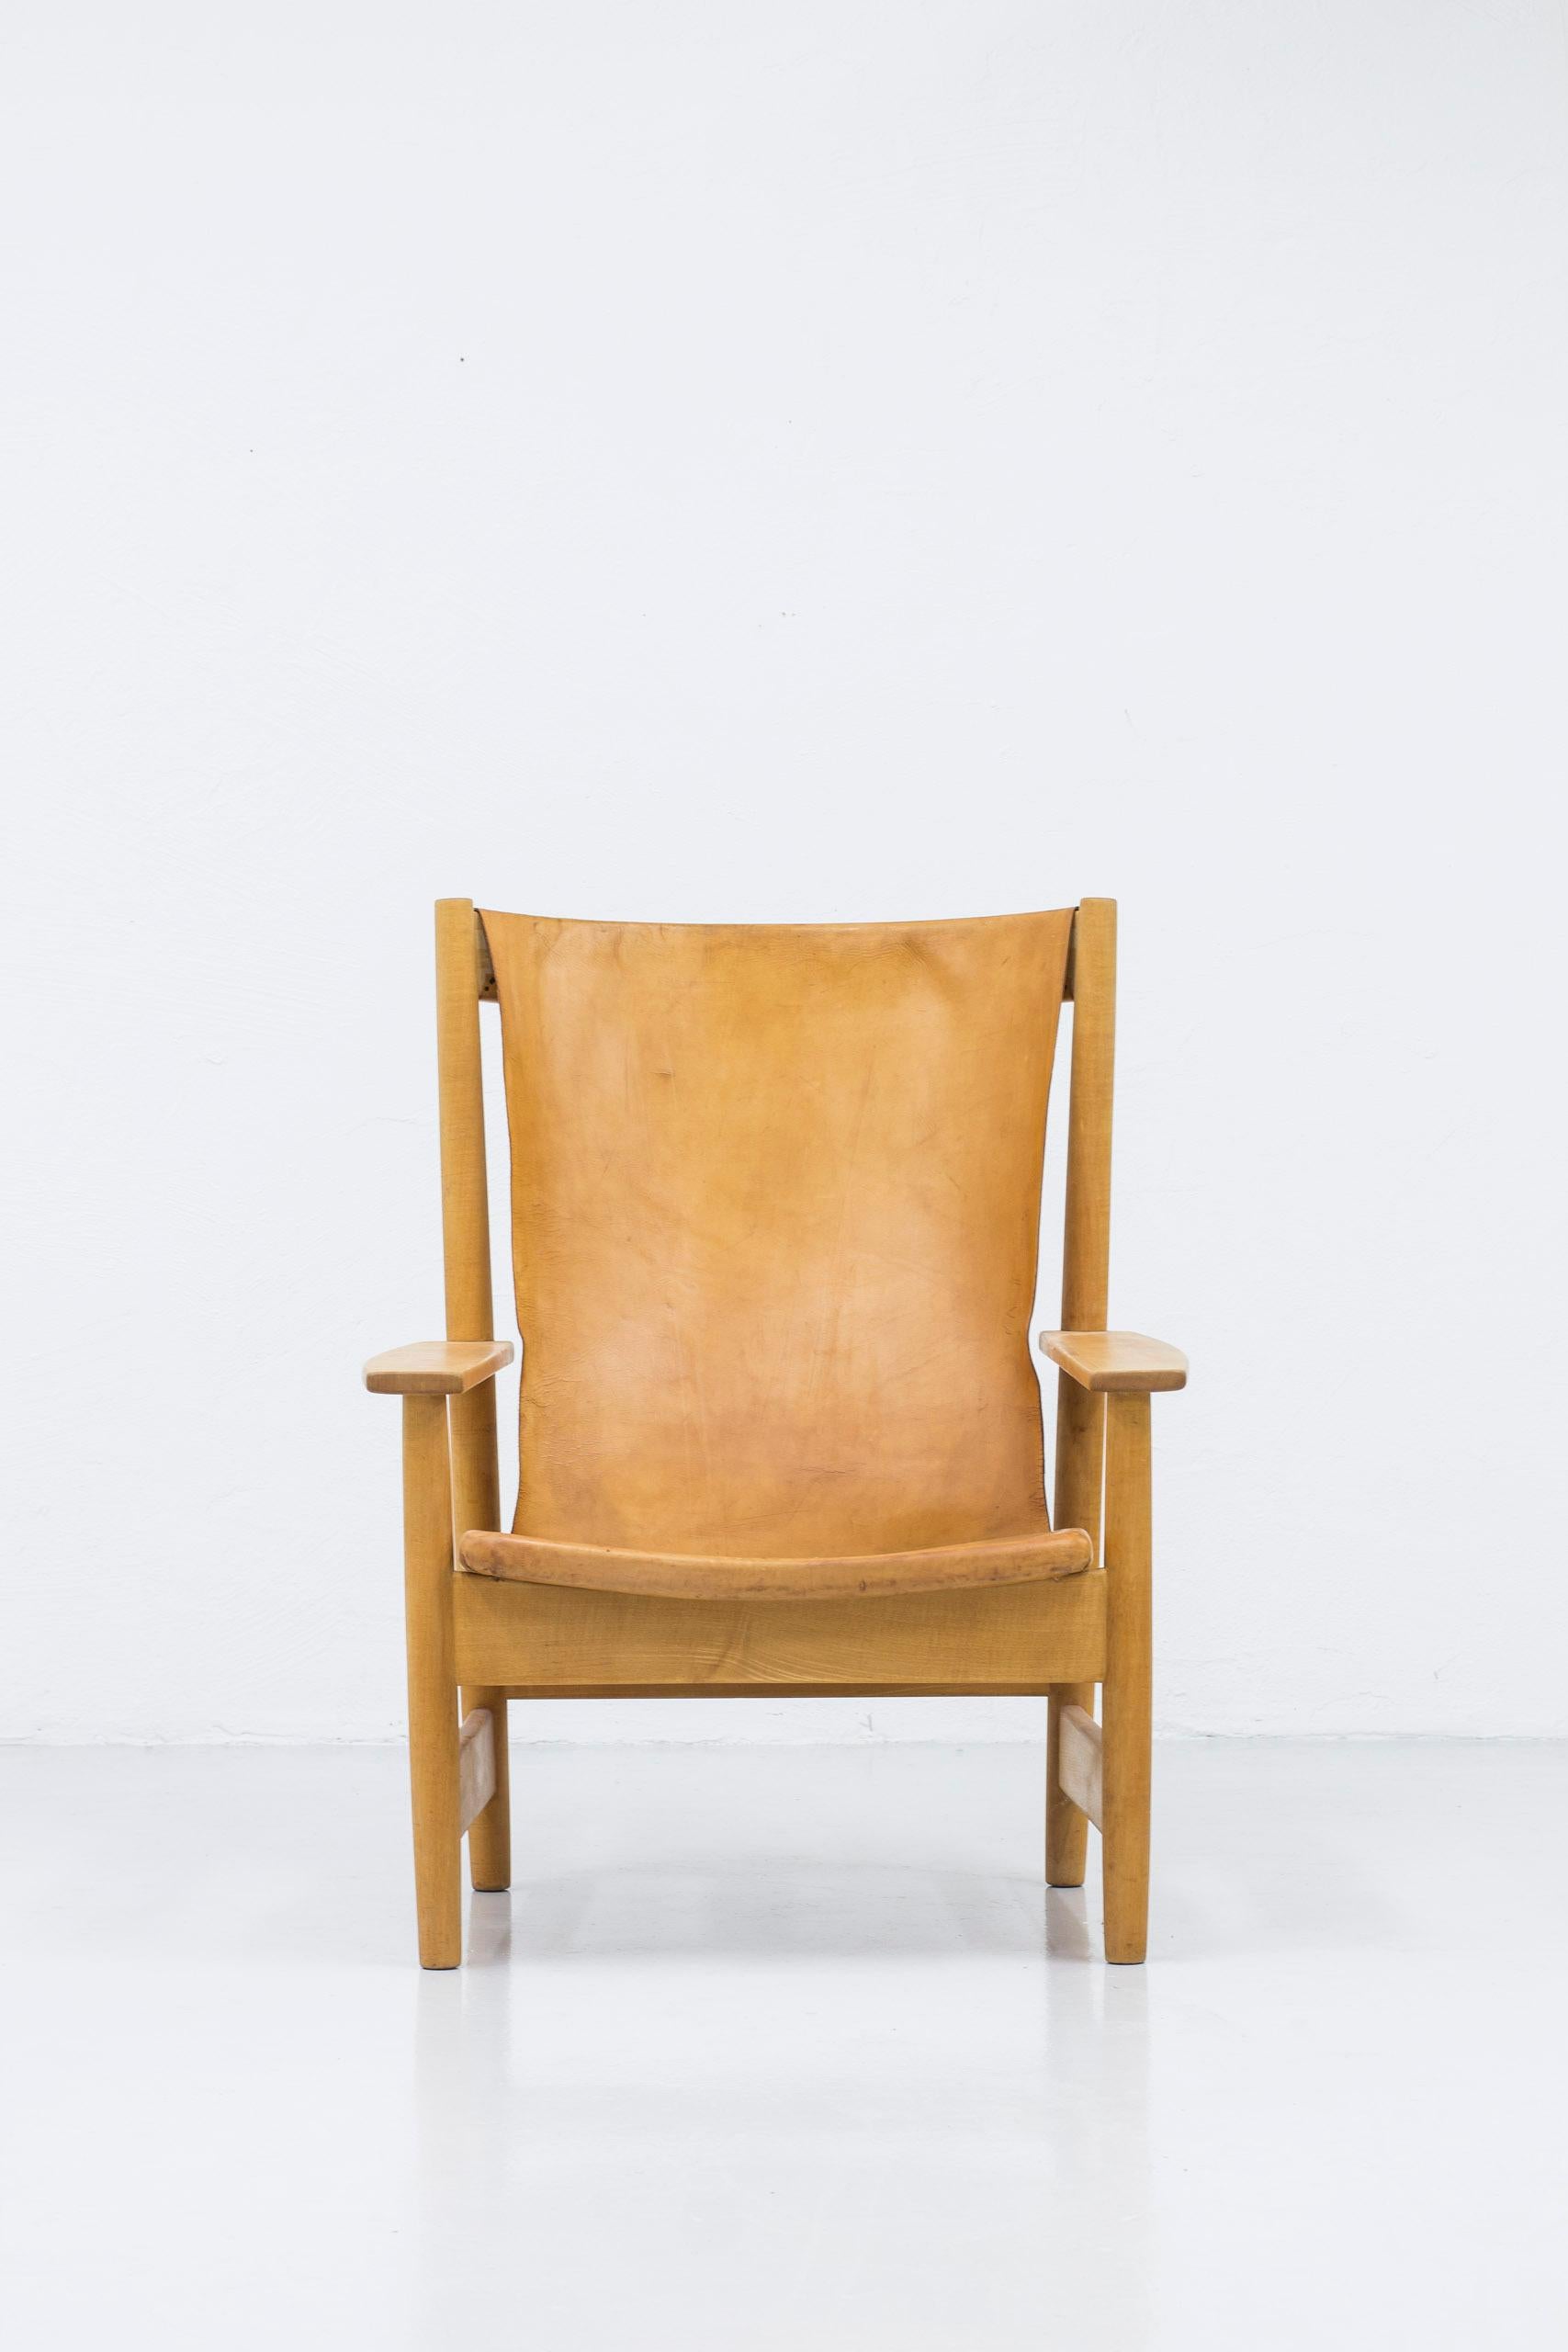 Large and powerful high back lounge chair from the Swedish Modern era. Made from solid beech wood with natural leather that has aged into a beautiful cognac color. Made in Sweden during the 1950s. Very good vintage condition with age related wear